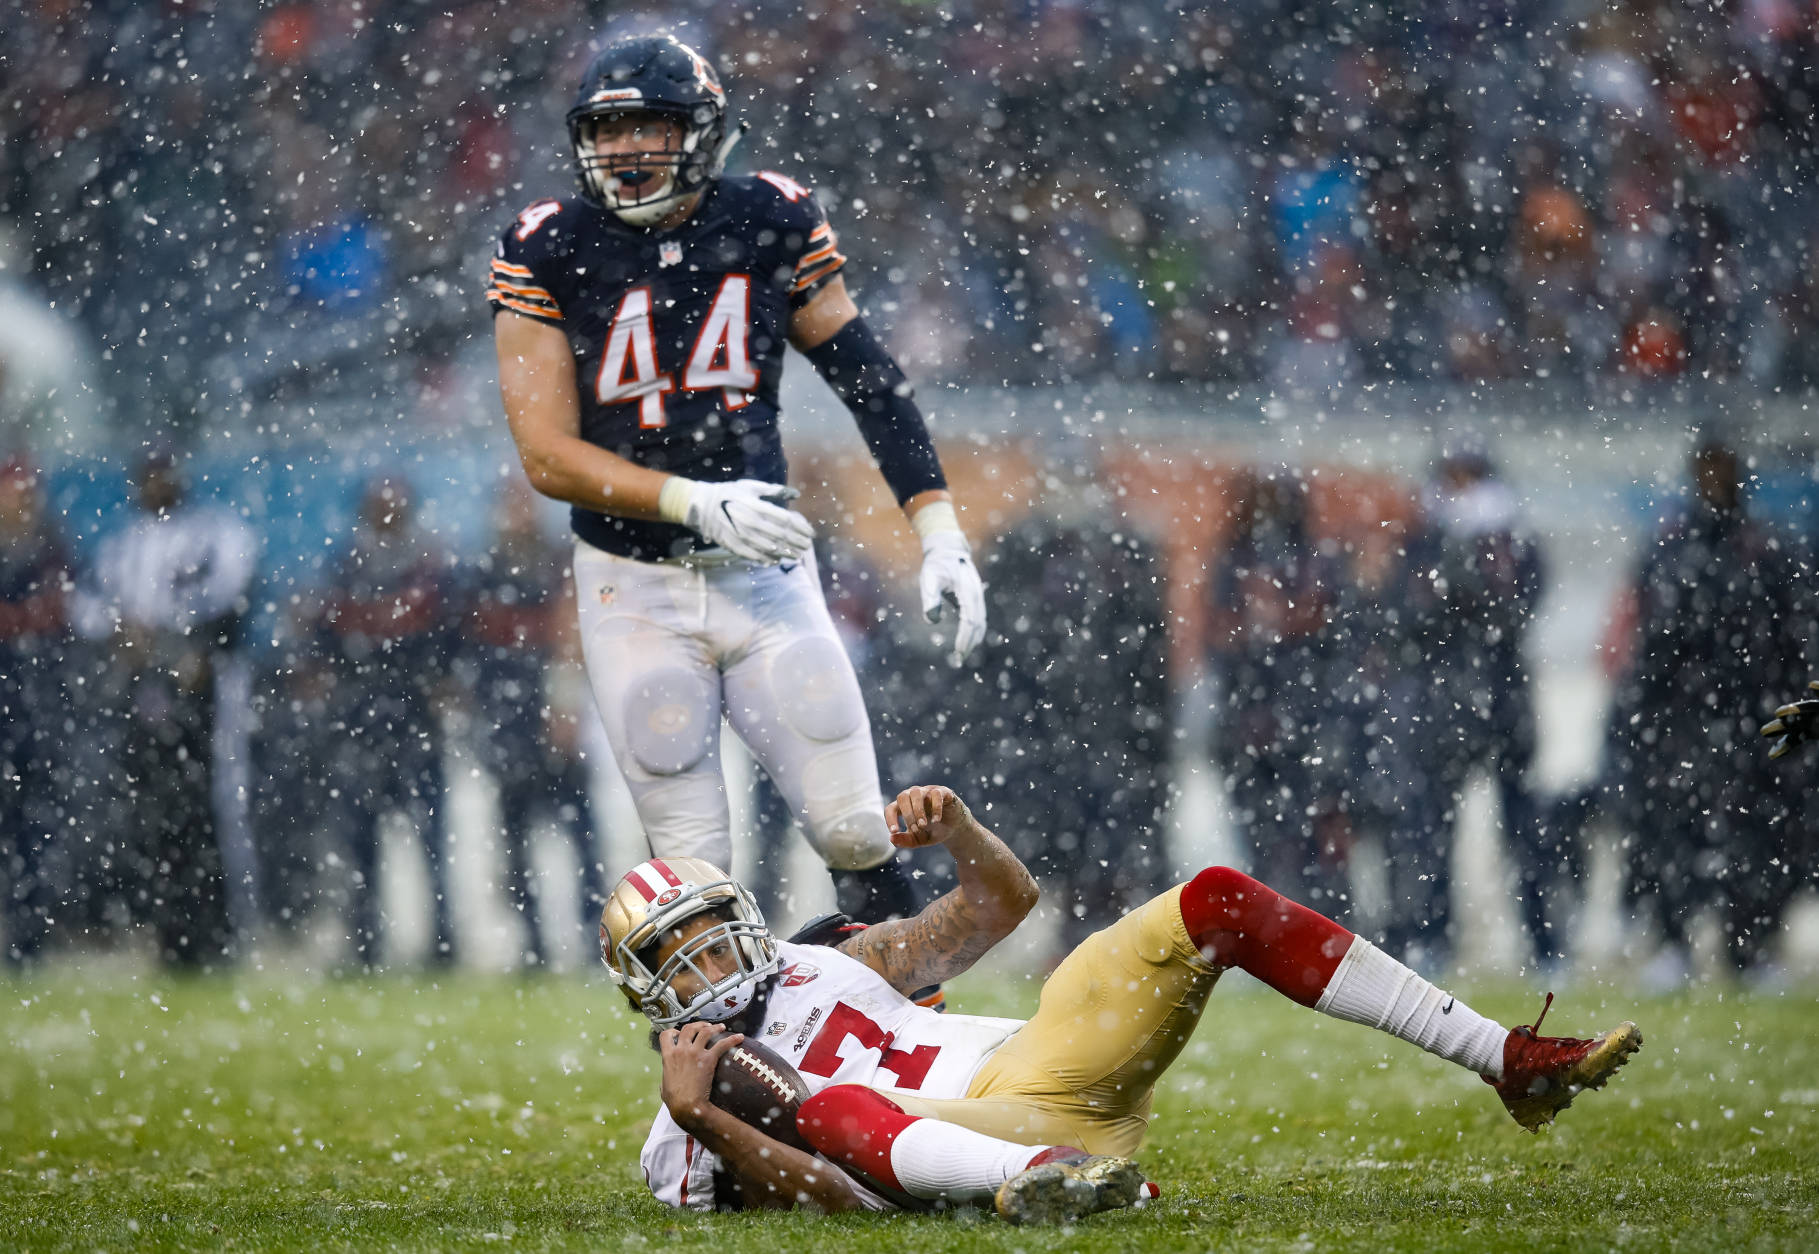 CHICAGO, IL - DECEMBER 04:   Quarterback Colin Kaepernick #7 of the San Francisco 49ers lays in front of  Nick Kwiatkoski #44 of the Chicago Bears in the third quarter at Soldier Field on December 4, 2016 in Chicago, Illinois.  (Photo by Joe Robbins/Getty Images)